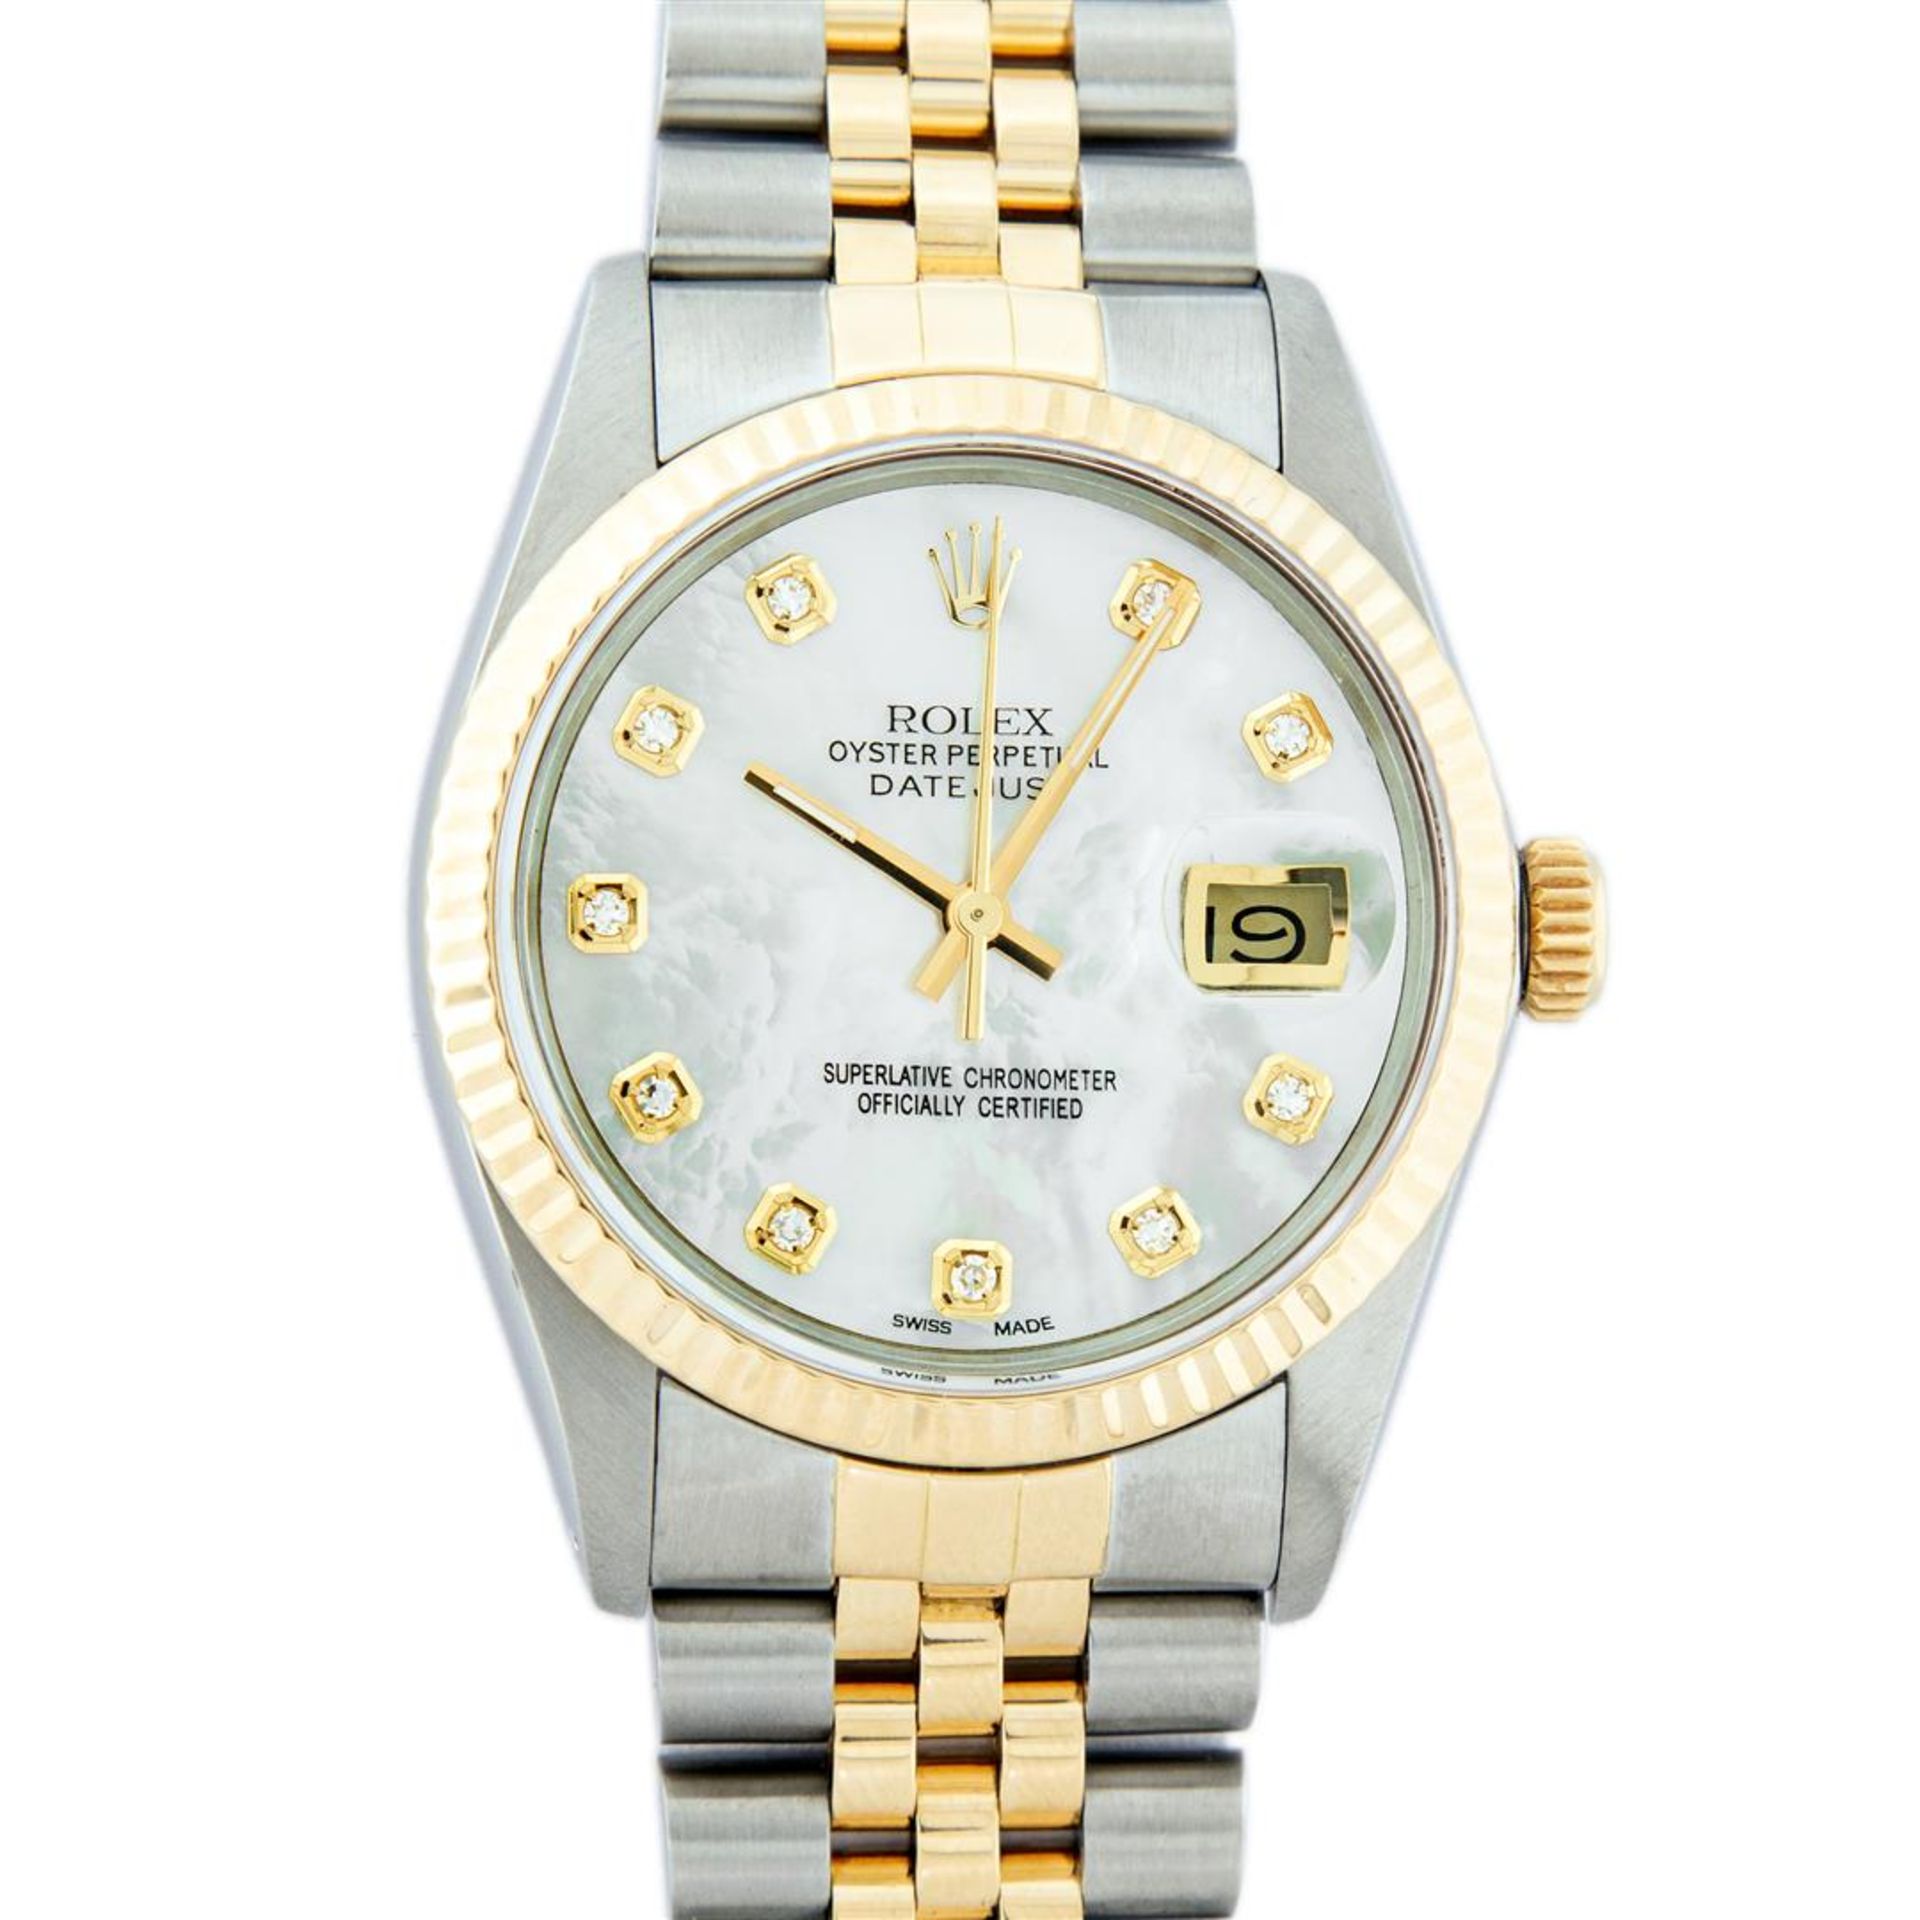 Rolex Mens 2 Tone Mother Of Pearl VS Diamond 36MM Datejust Wristwatch - Image 2 of 18